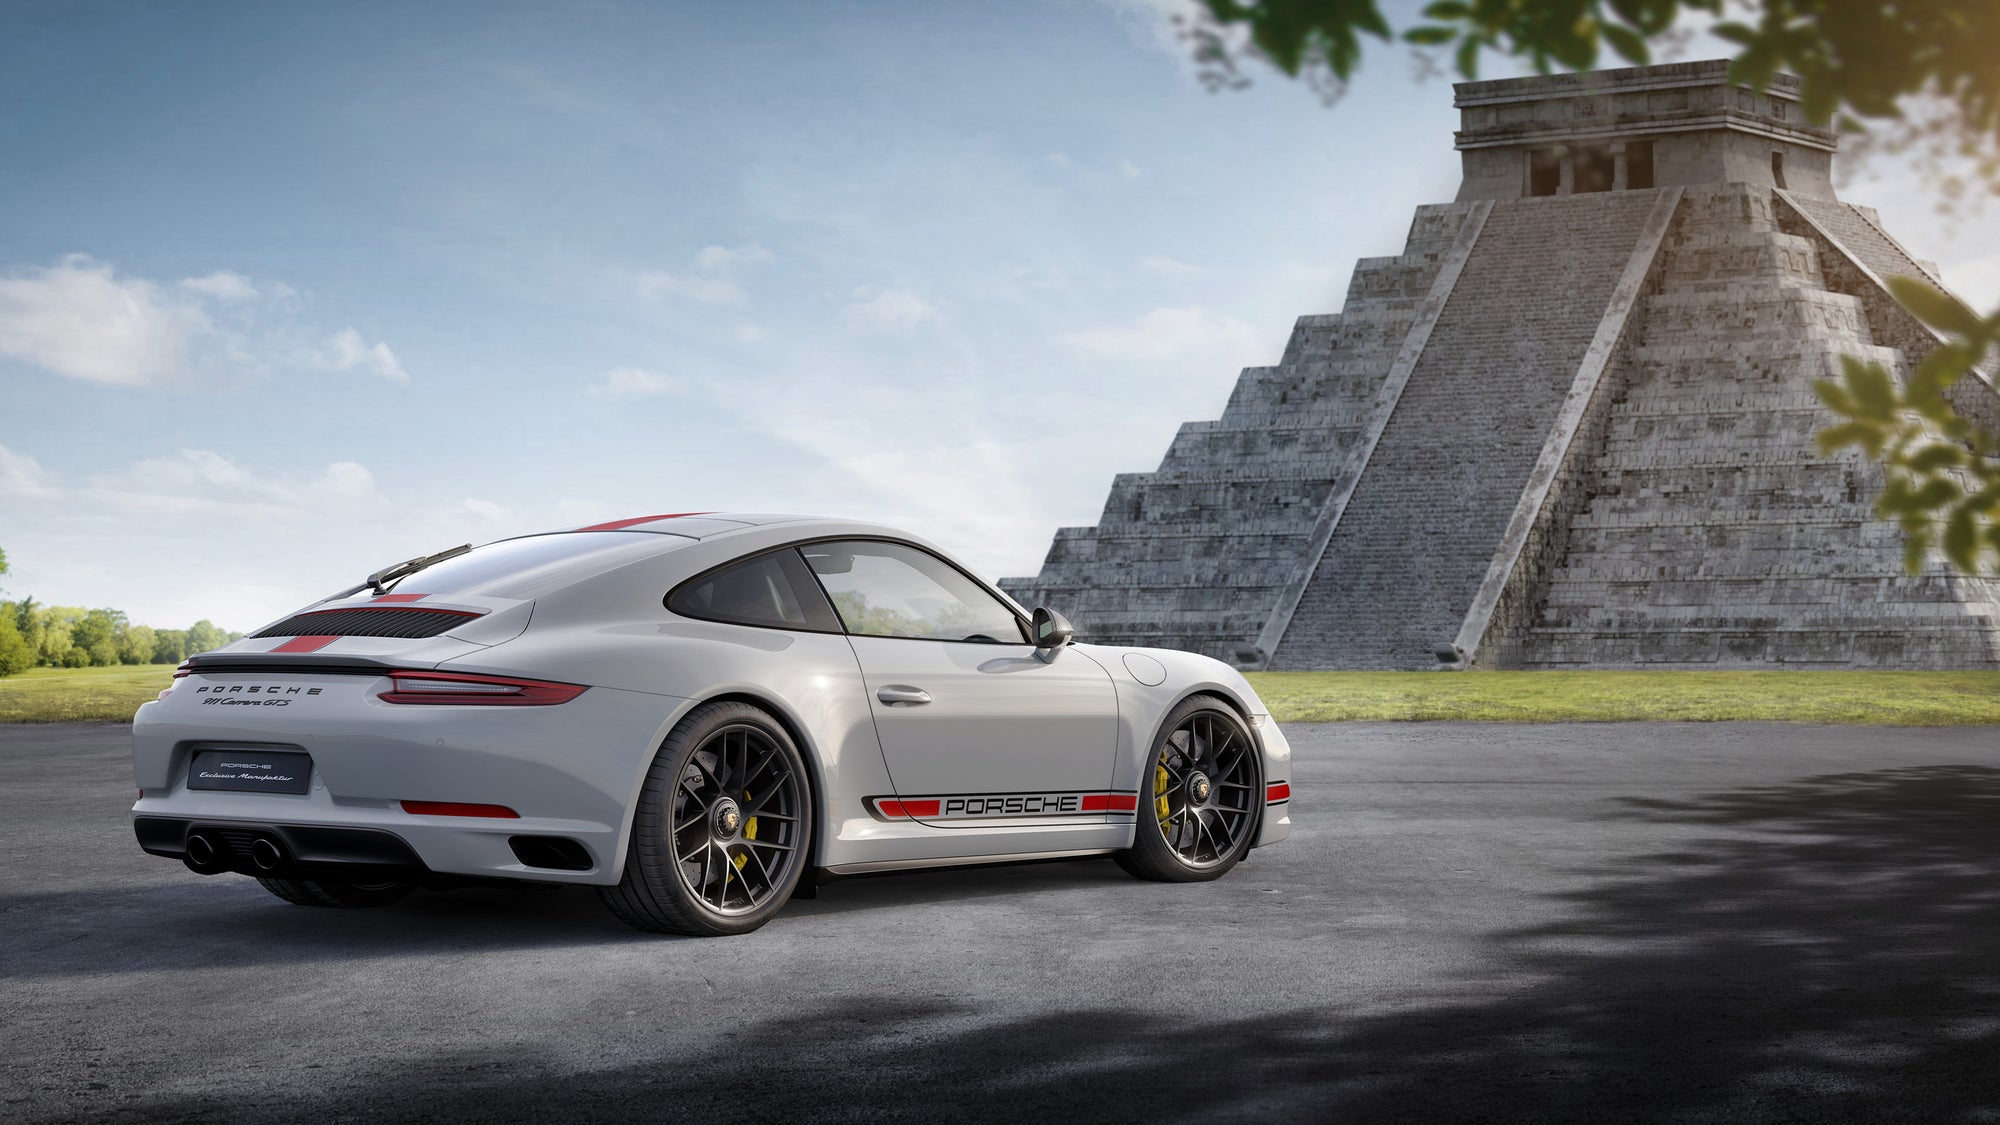 The Porsche 911: Ownership of the Name